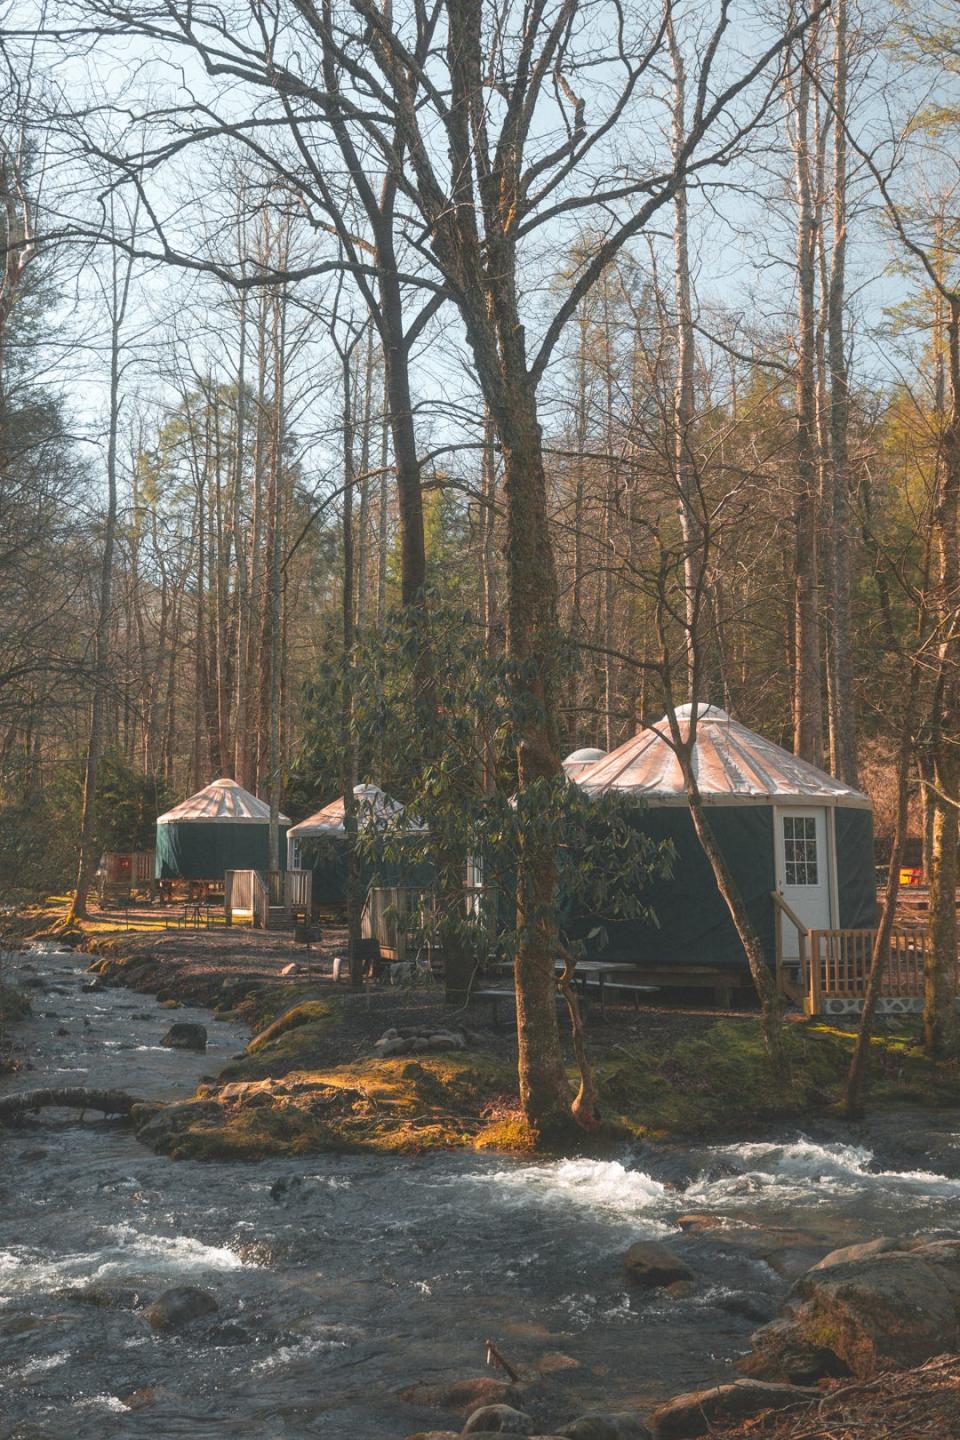 Roamstead guests can campout in yurts, tents, camper hookups, or opt for cabins or lodge rooms. The campground intends to appeal to all types of campers.